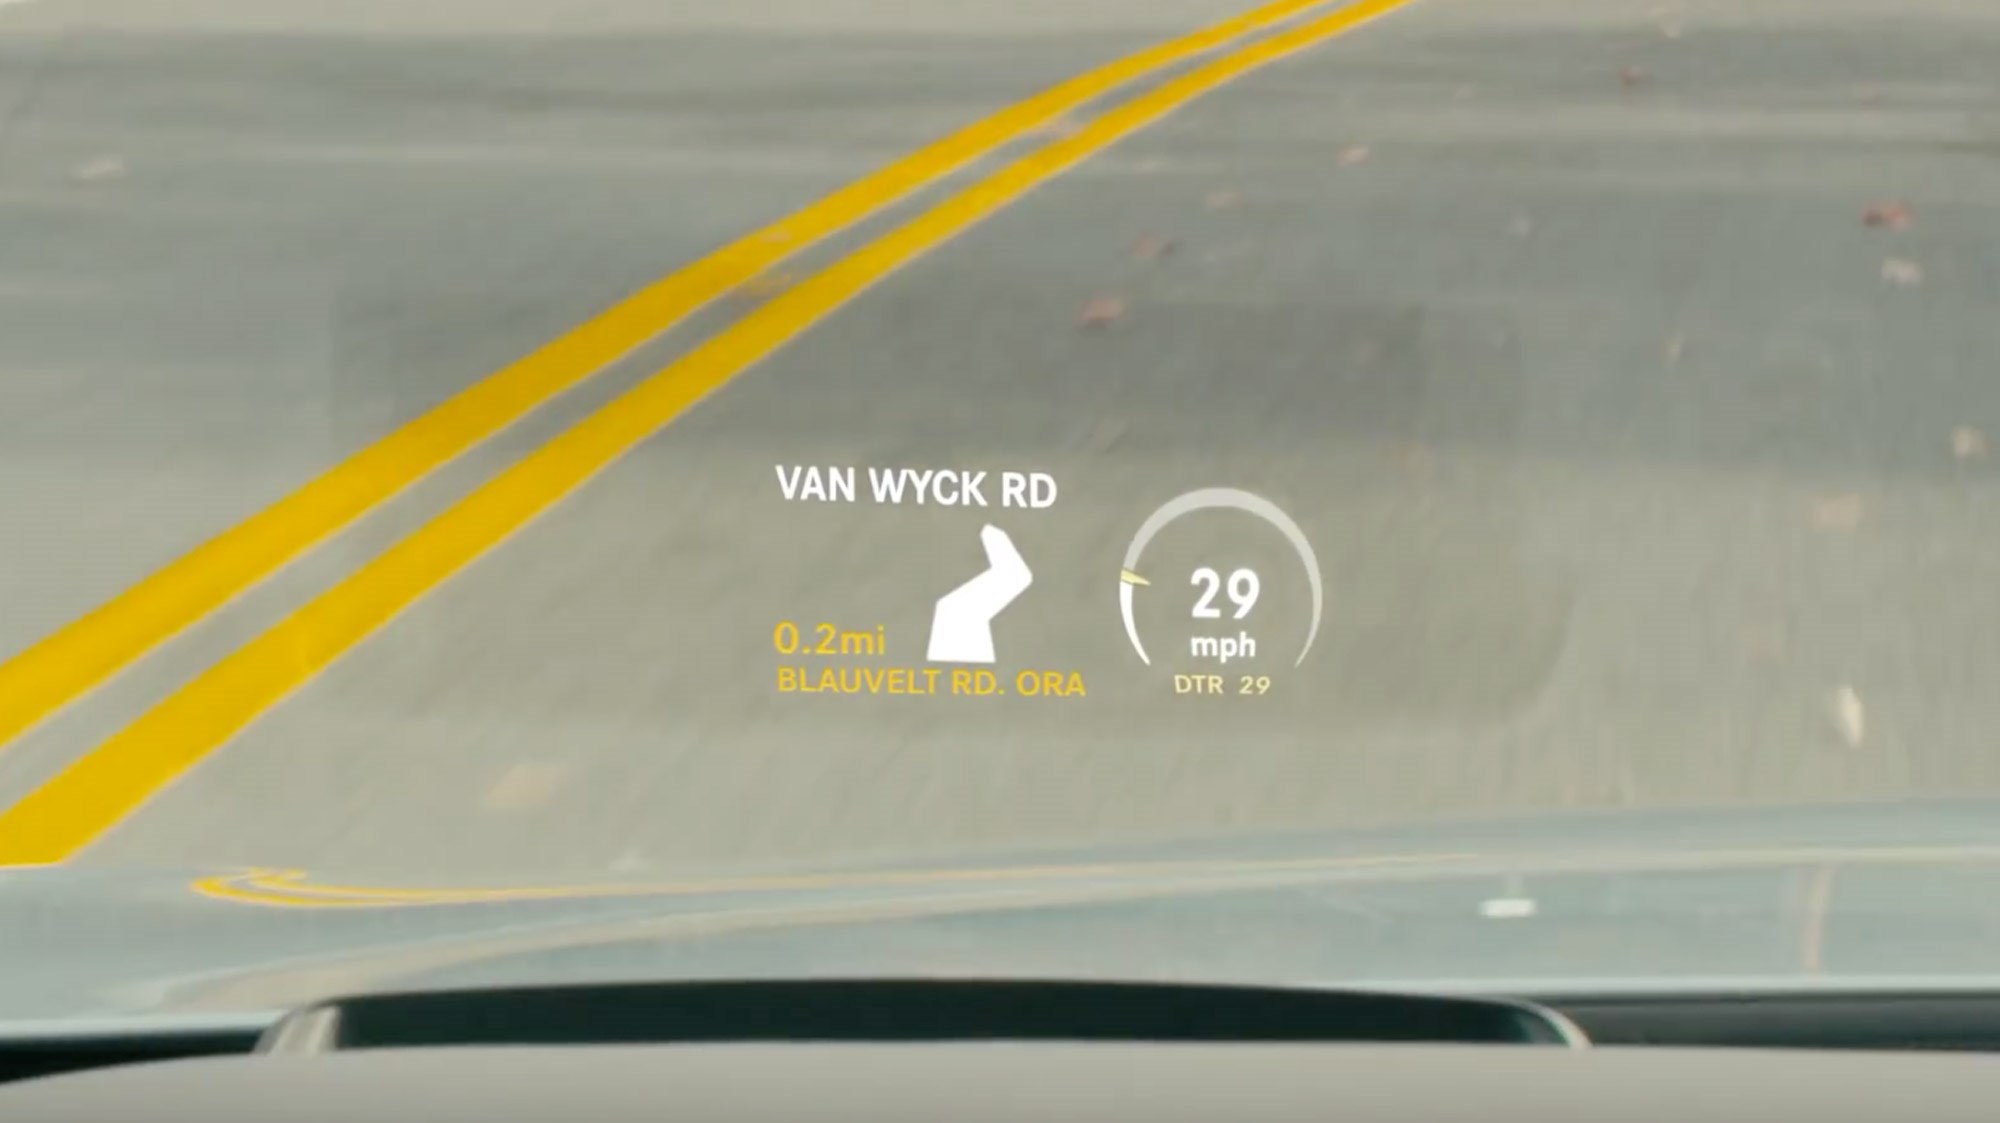 Heads-up display to stay focused on the road